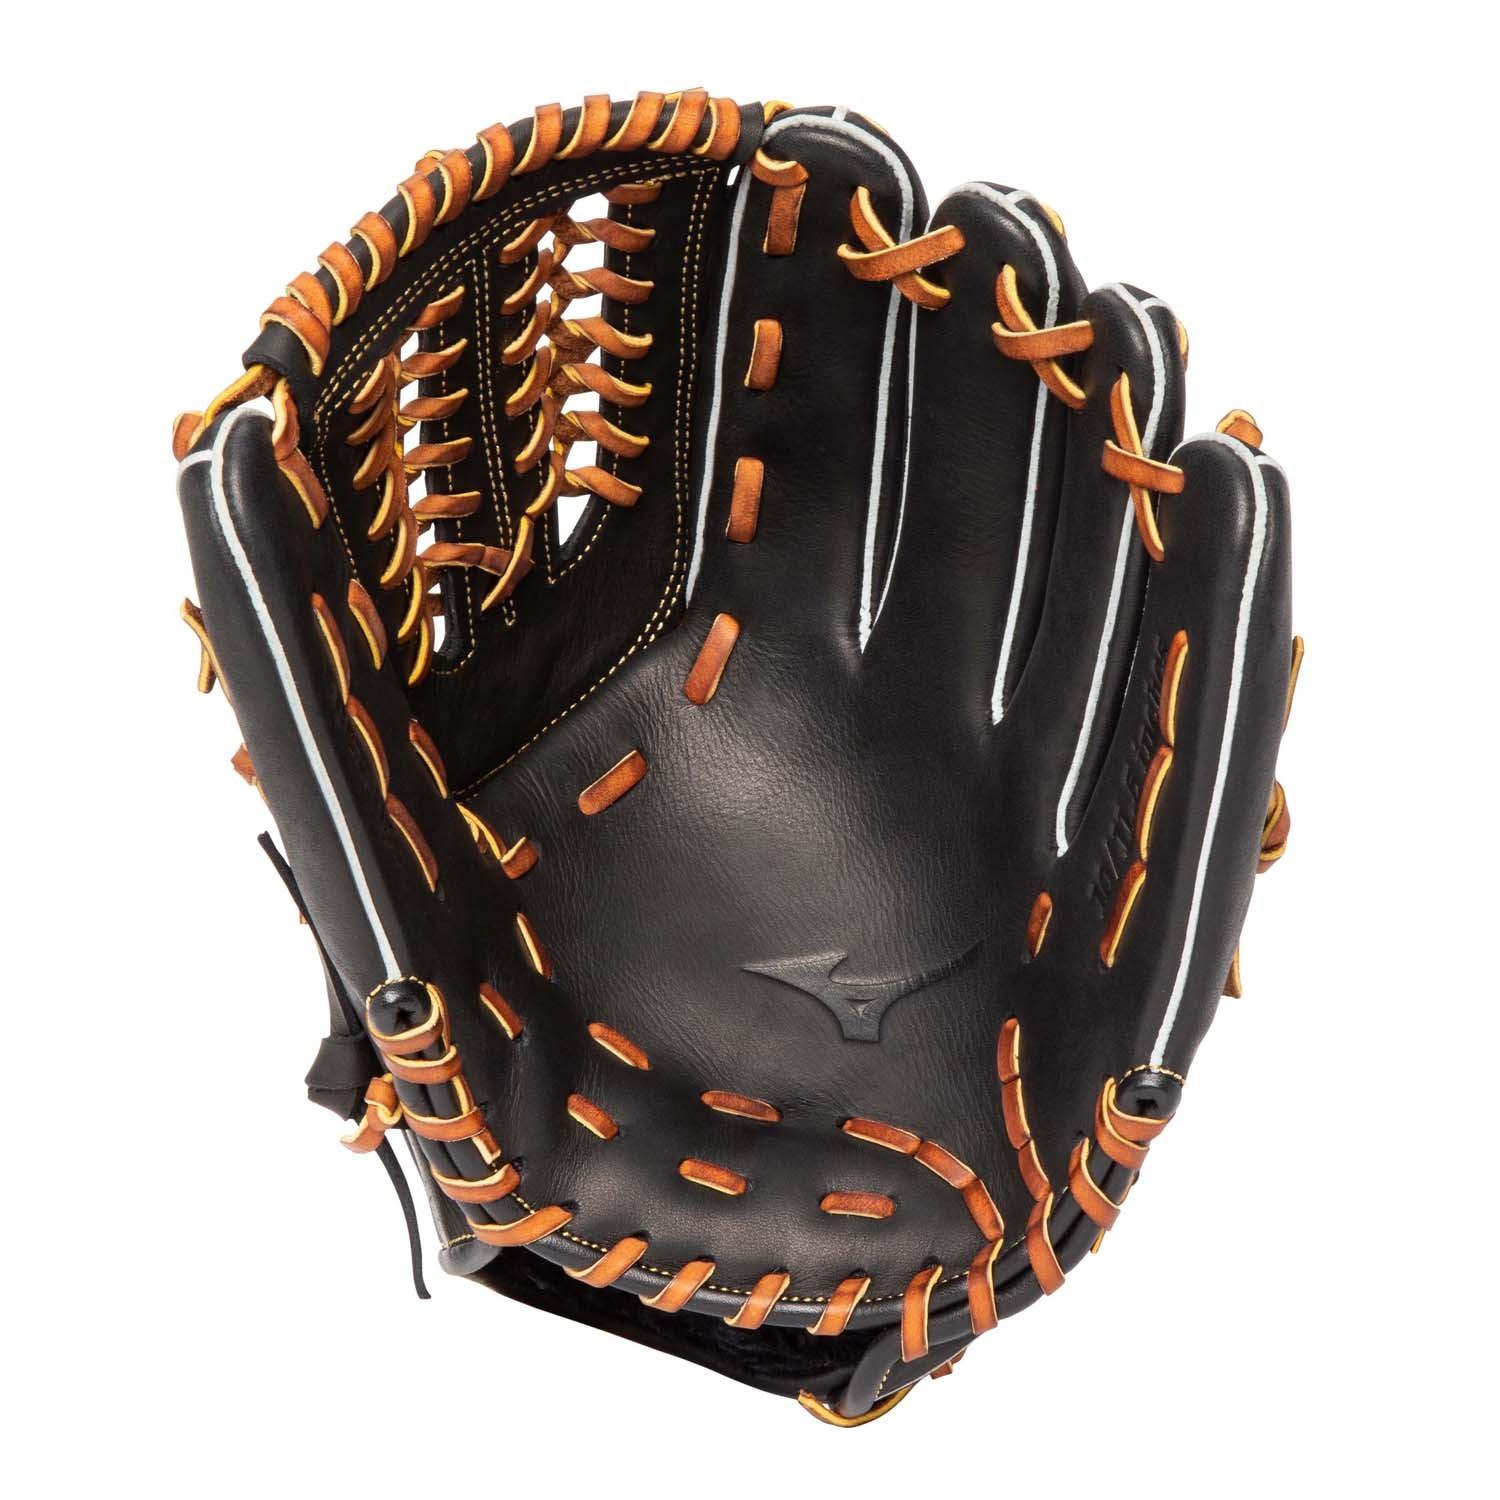 Select 9 Infield Baseball Glove 11.5" - Sports Excellence